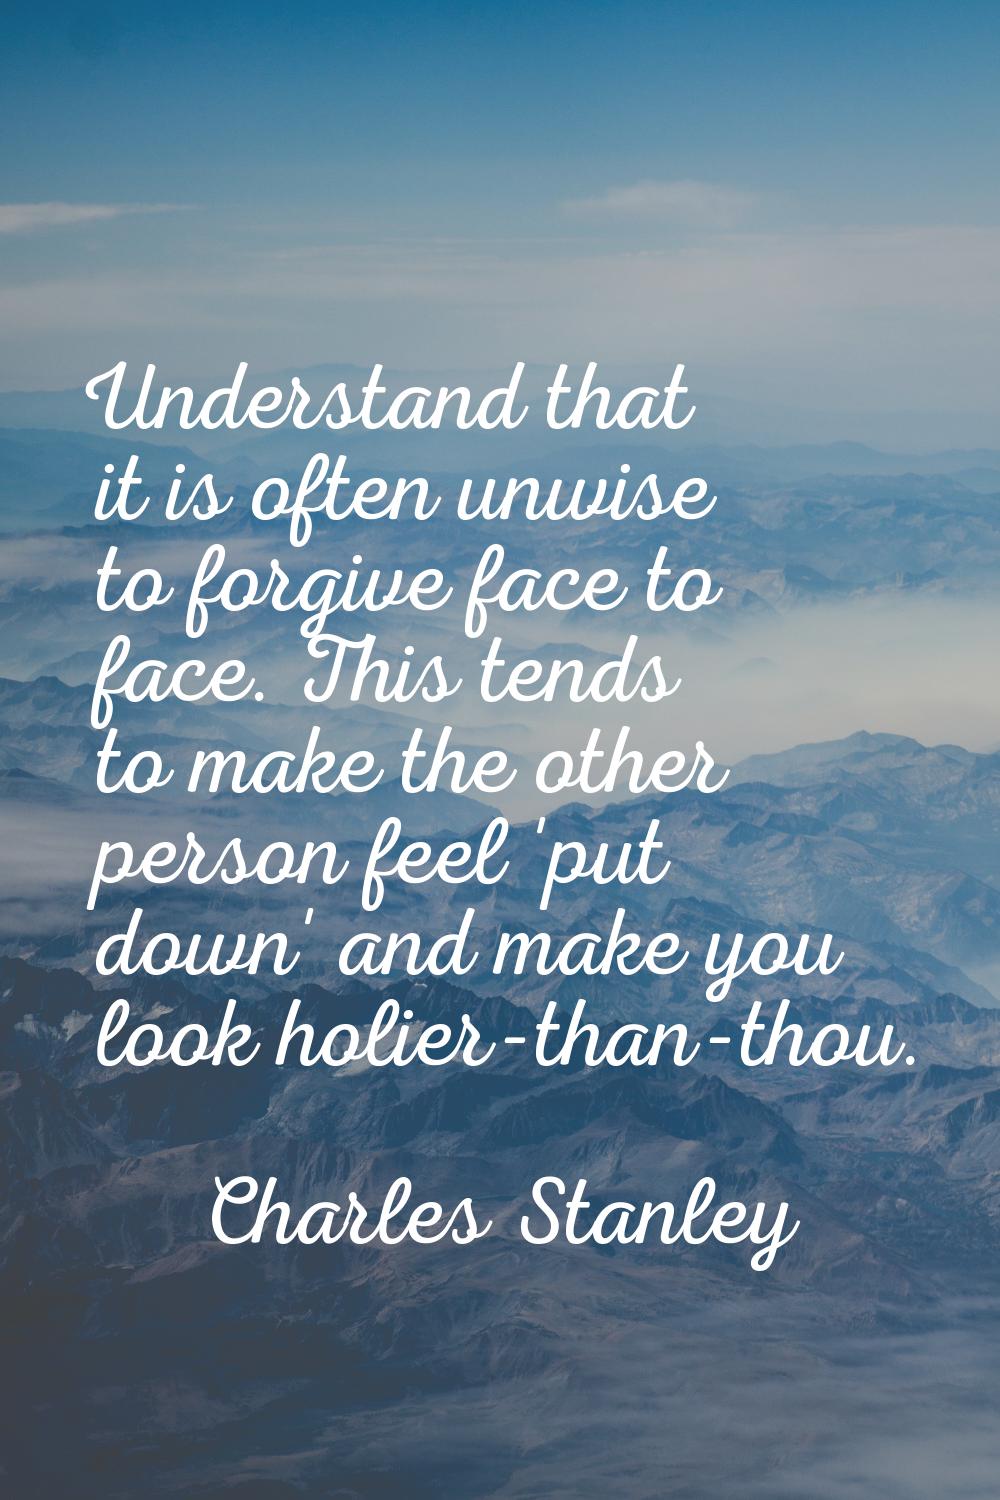 Understand that it is often unwise to forgive face to face. This tends to make the other person fee